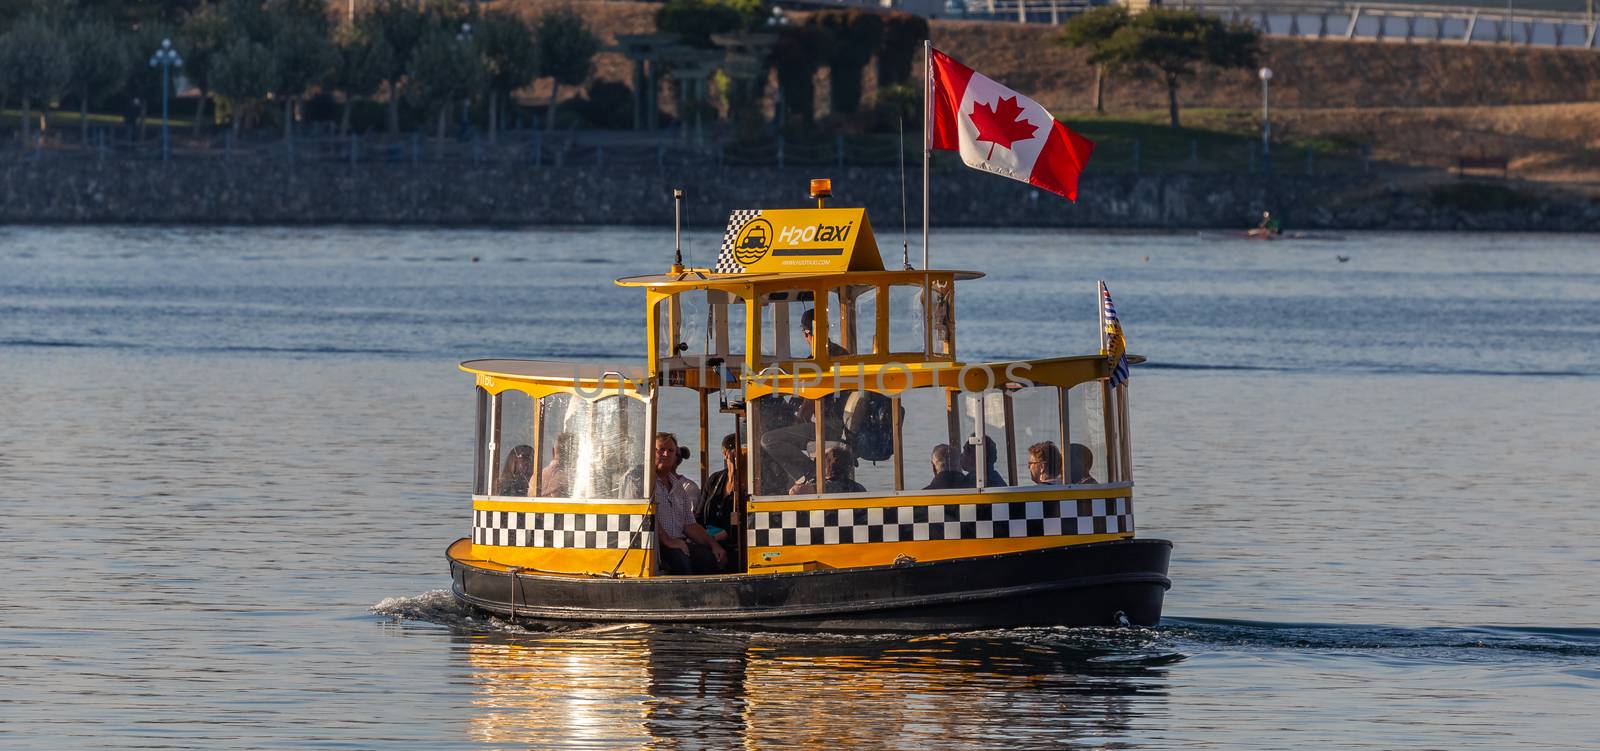 Victoria, BC, Canada - September 4, 2018: Yellow water taxi sailing at sunset in the harbor with passengers inside. Canadian flag on top of it.